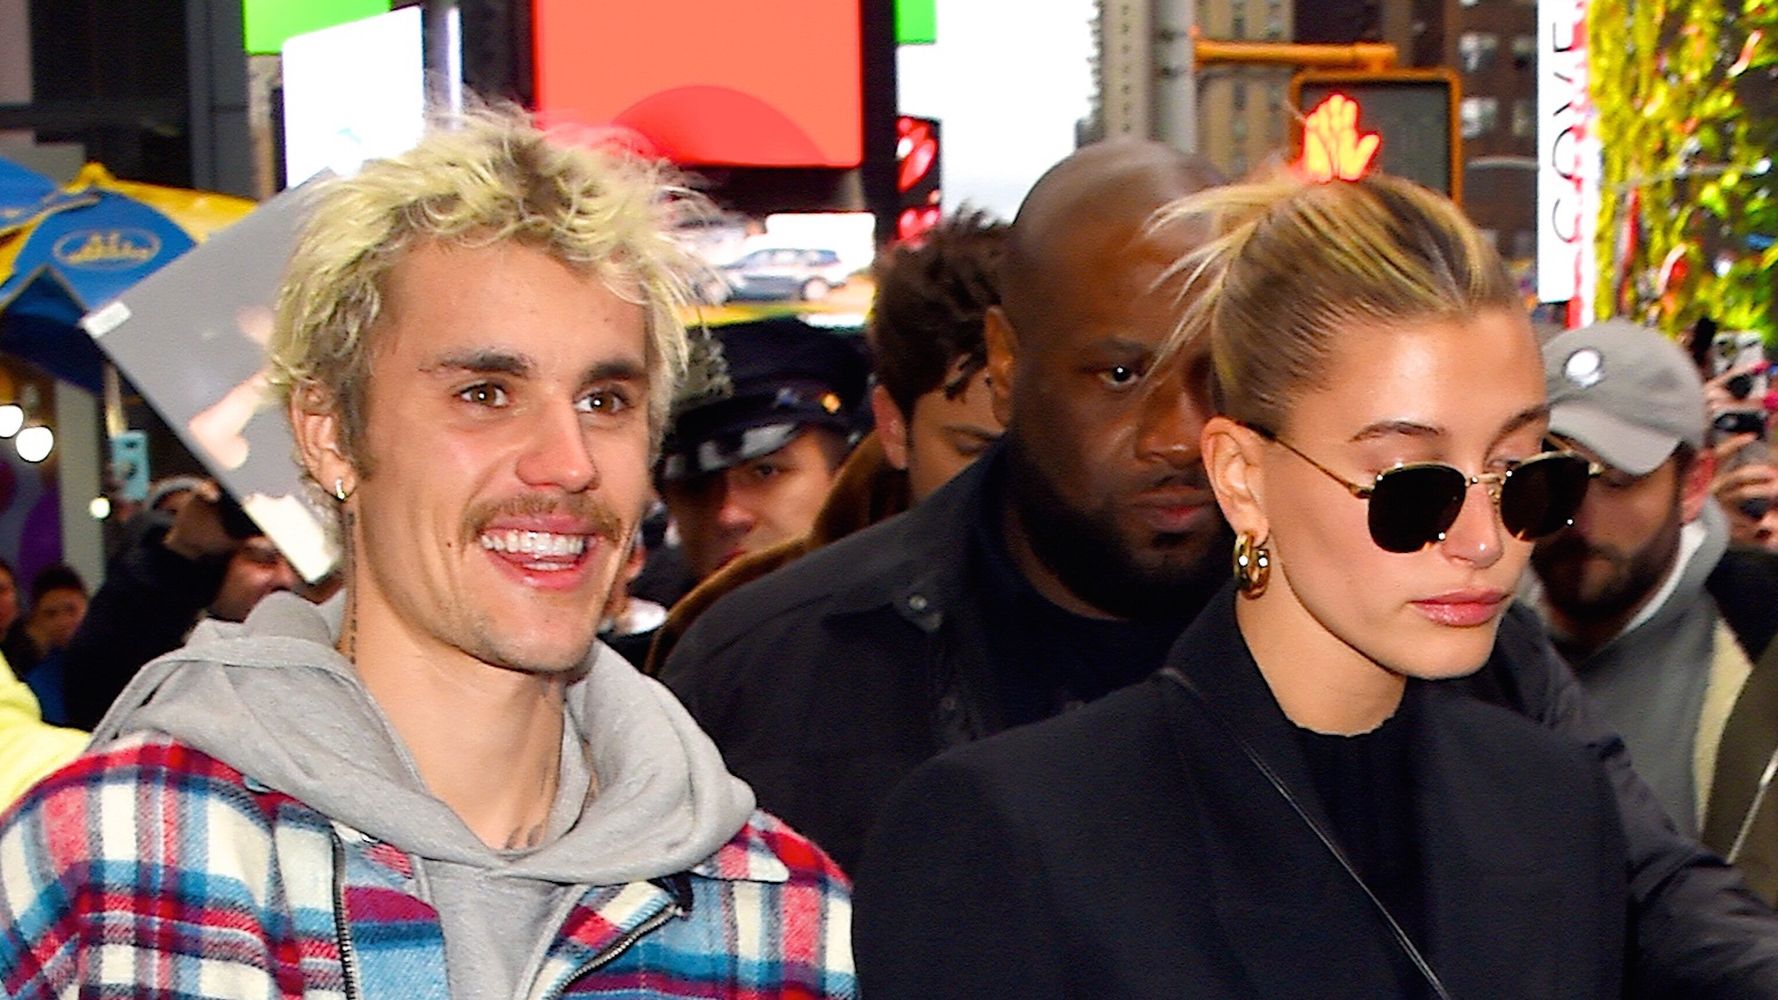 Justin Bieber says there was a “lack of trust” at the beginning of his marriage to Hailey Baldwin